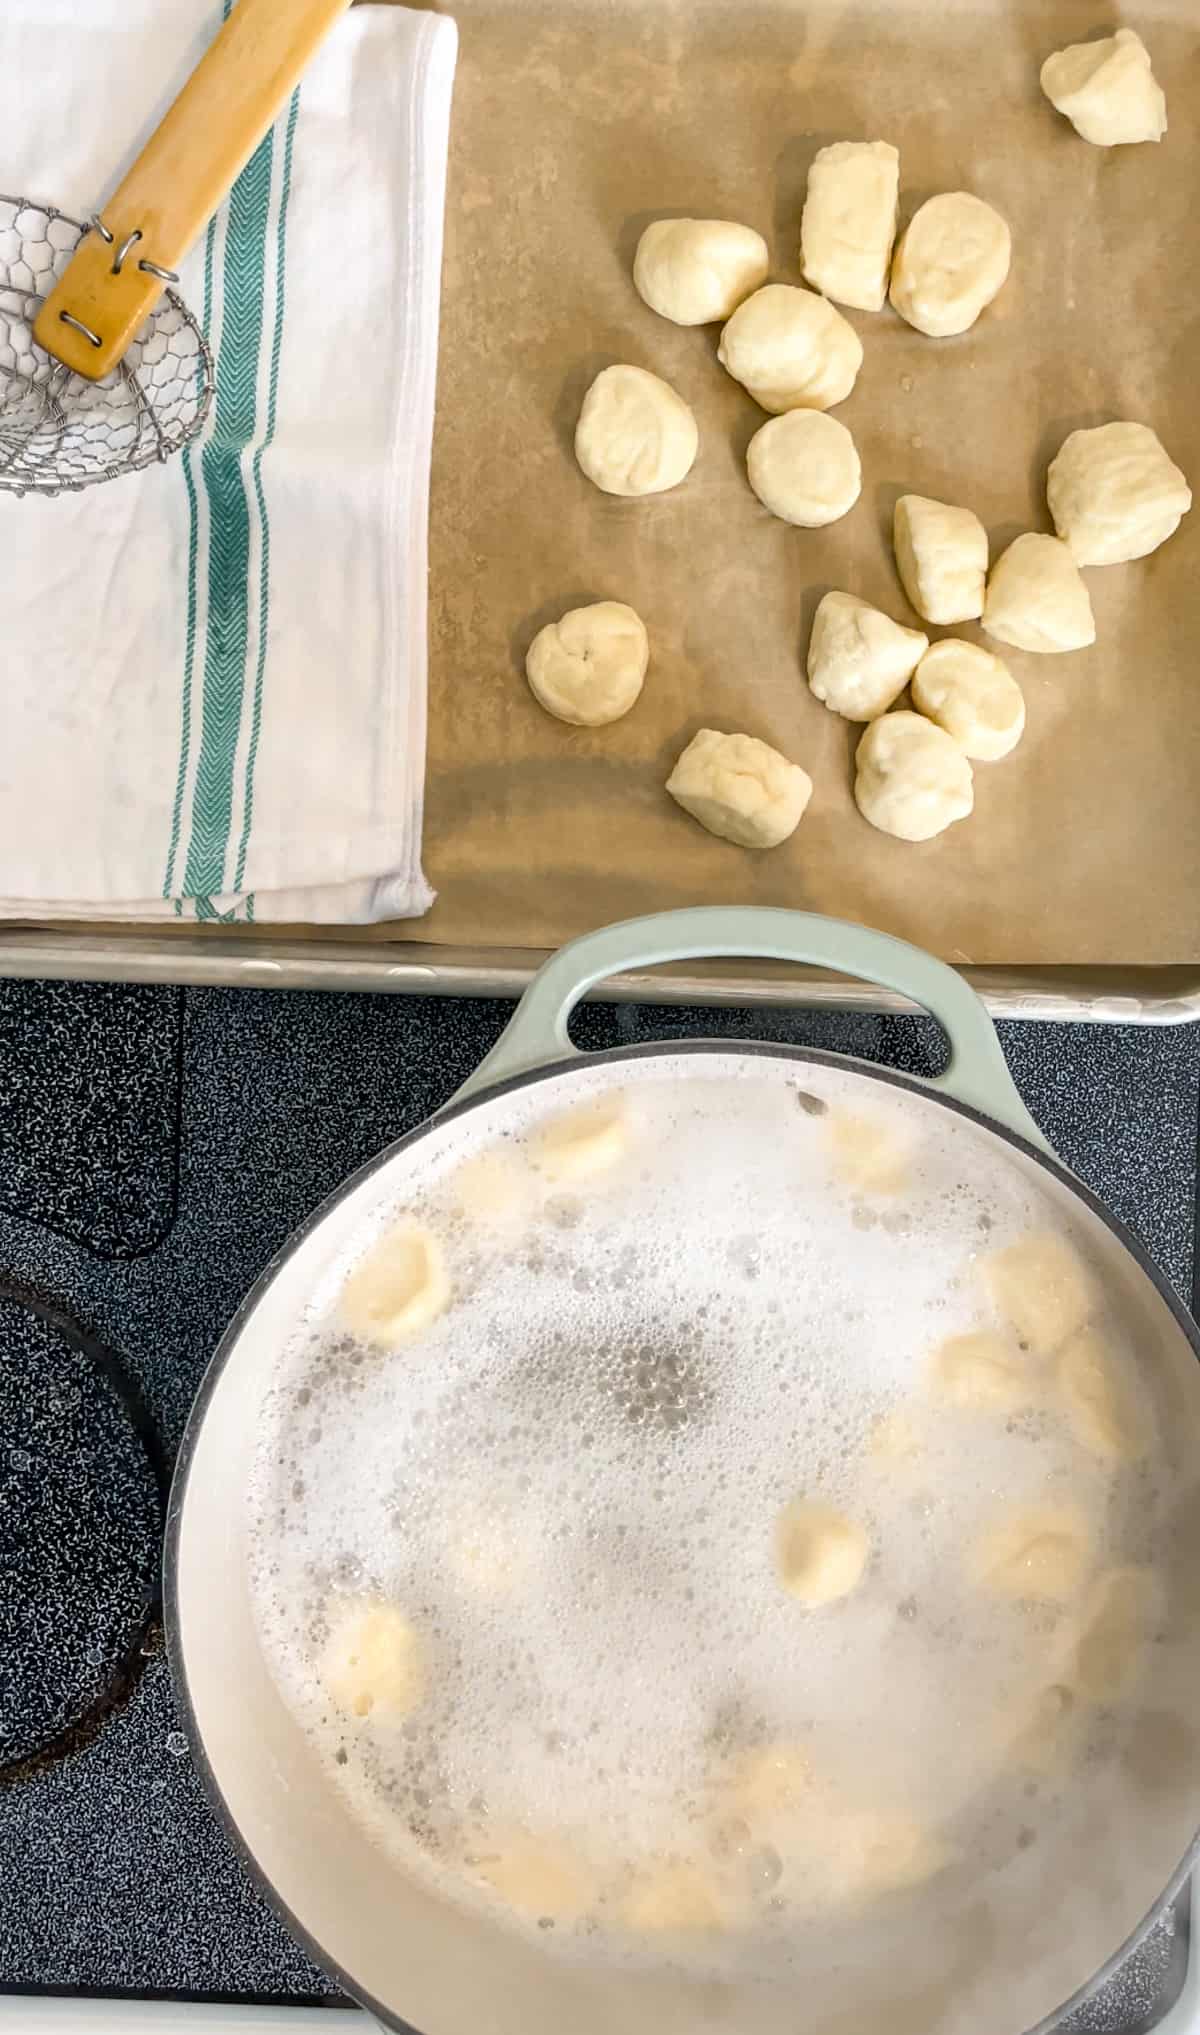 Pretzel dough pieces boiling in baking soda water and boiled pieces on a parchment-lined baking sheet with a towel and steel spider scooper.